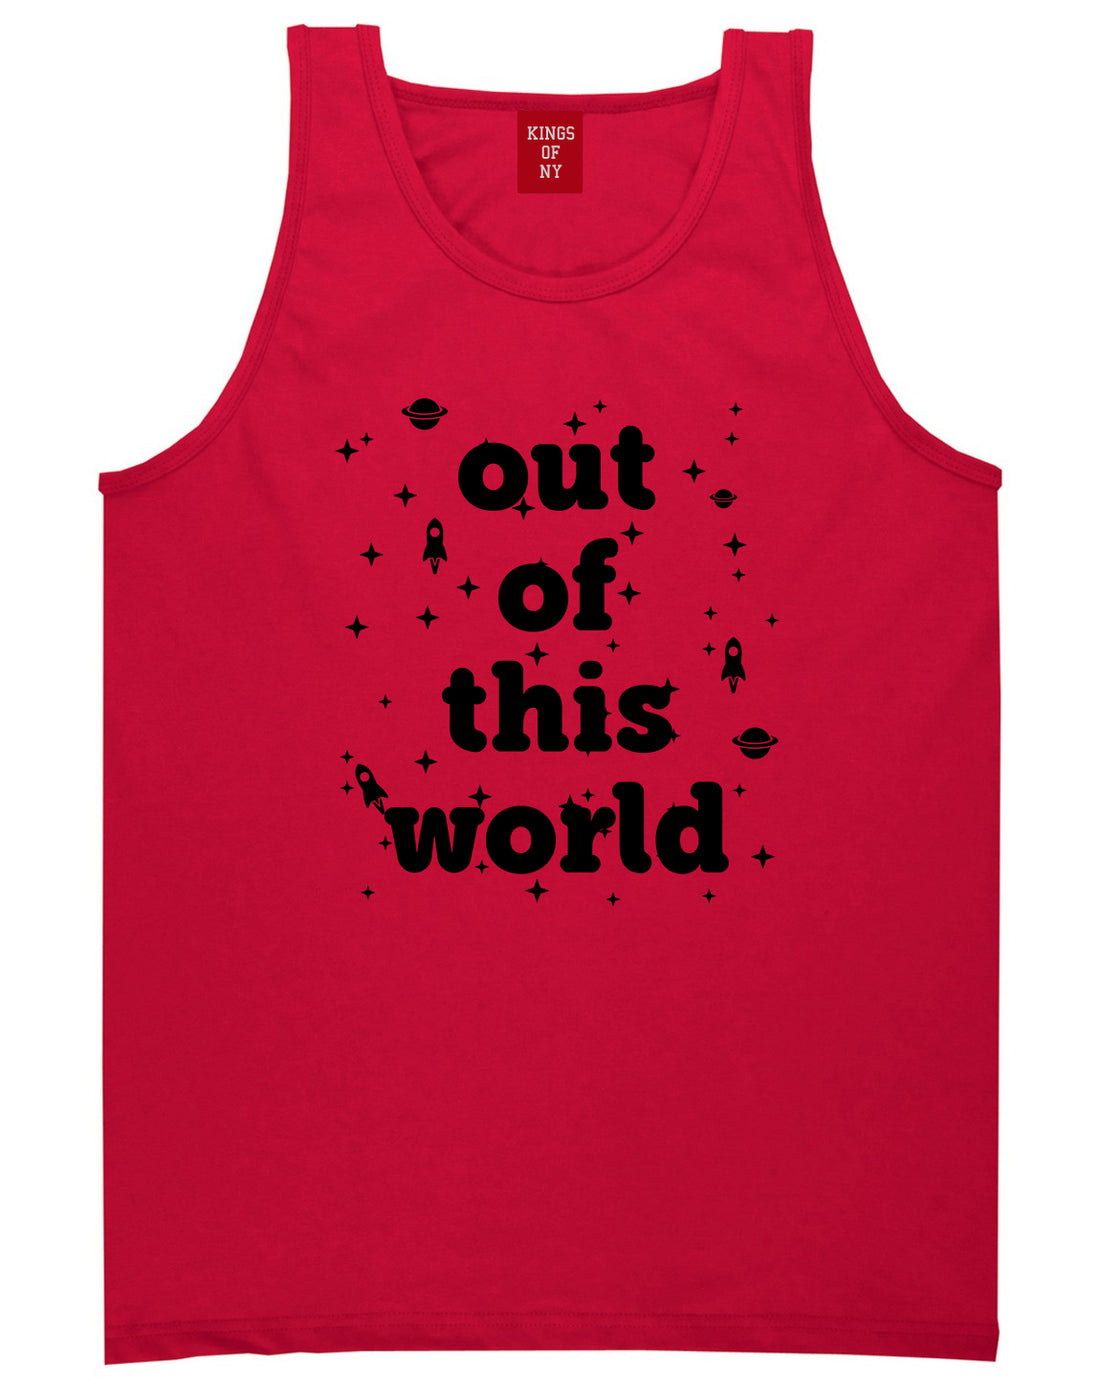 Out Of This World Space Galaxy Mens Tank Top Shirt Red by Kings Of NY